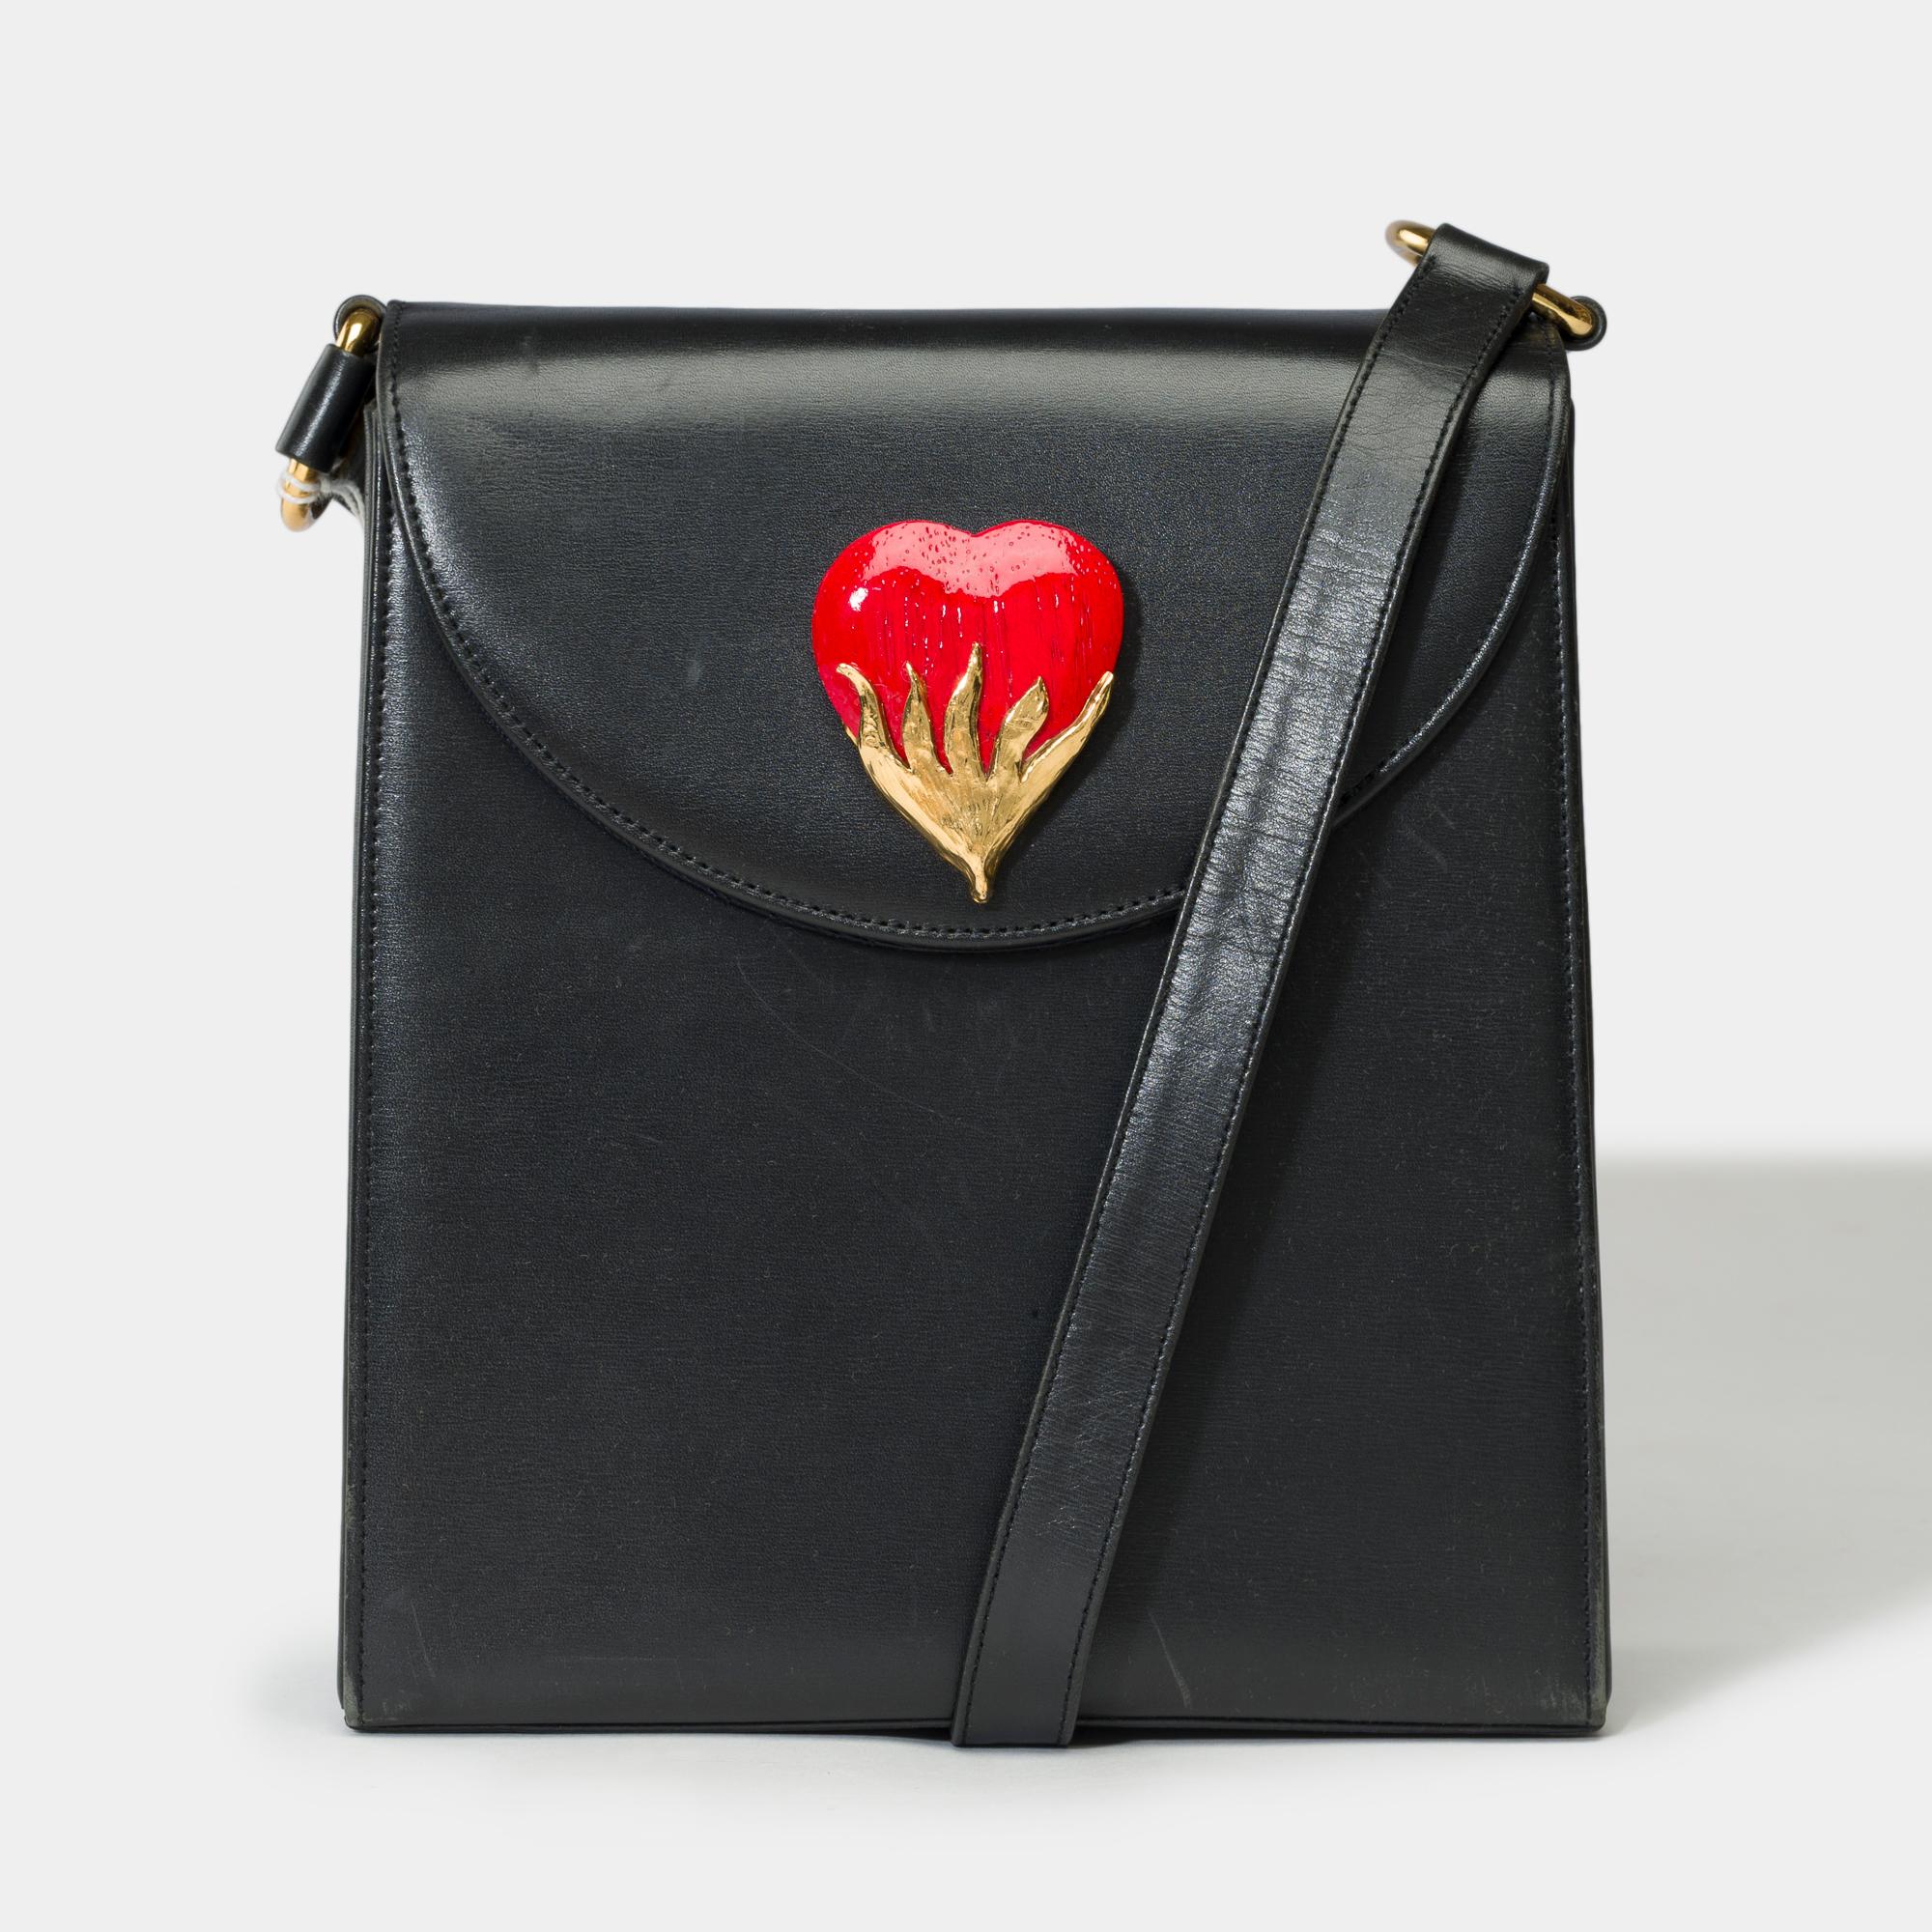 Lovely​ ​Yves​ ​Saint-Laurent​ ​vintage​ ​Messenger​ ​bag​ ​in​ ​black​ ​box​ ​calf​ ​leather,​ ​gold​ ​metal​ ​trim,​ ​black​ ​leather​ ​handle​ ​for​ ​shoulder​ ​or​ ​crossbody​ ​carry

Flap​ ​closure​ ​with​ ​snap​ ​button
1​ ​patch​ ​pocket
1​